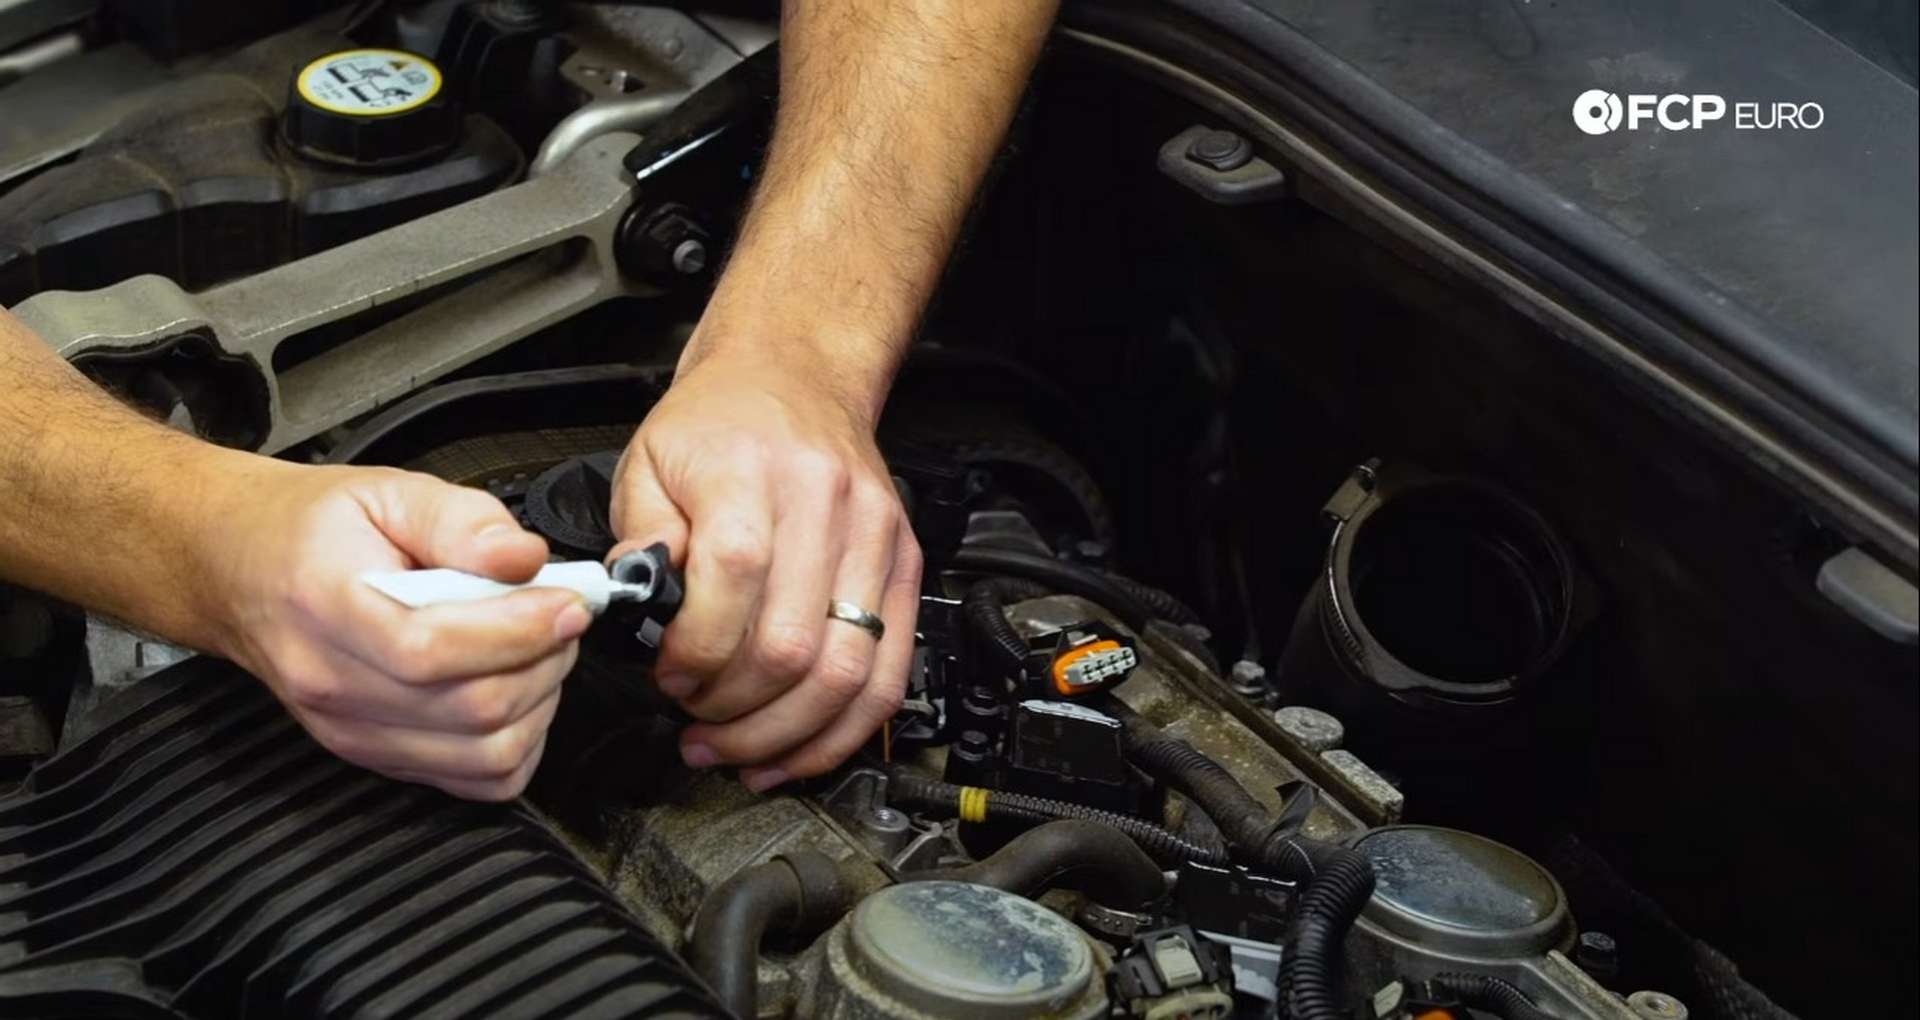 DIY Volvo Spark Plug and Ignition Coil Replacement placing the dielectric grease onto the ignition coil